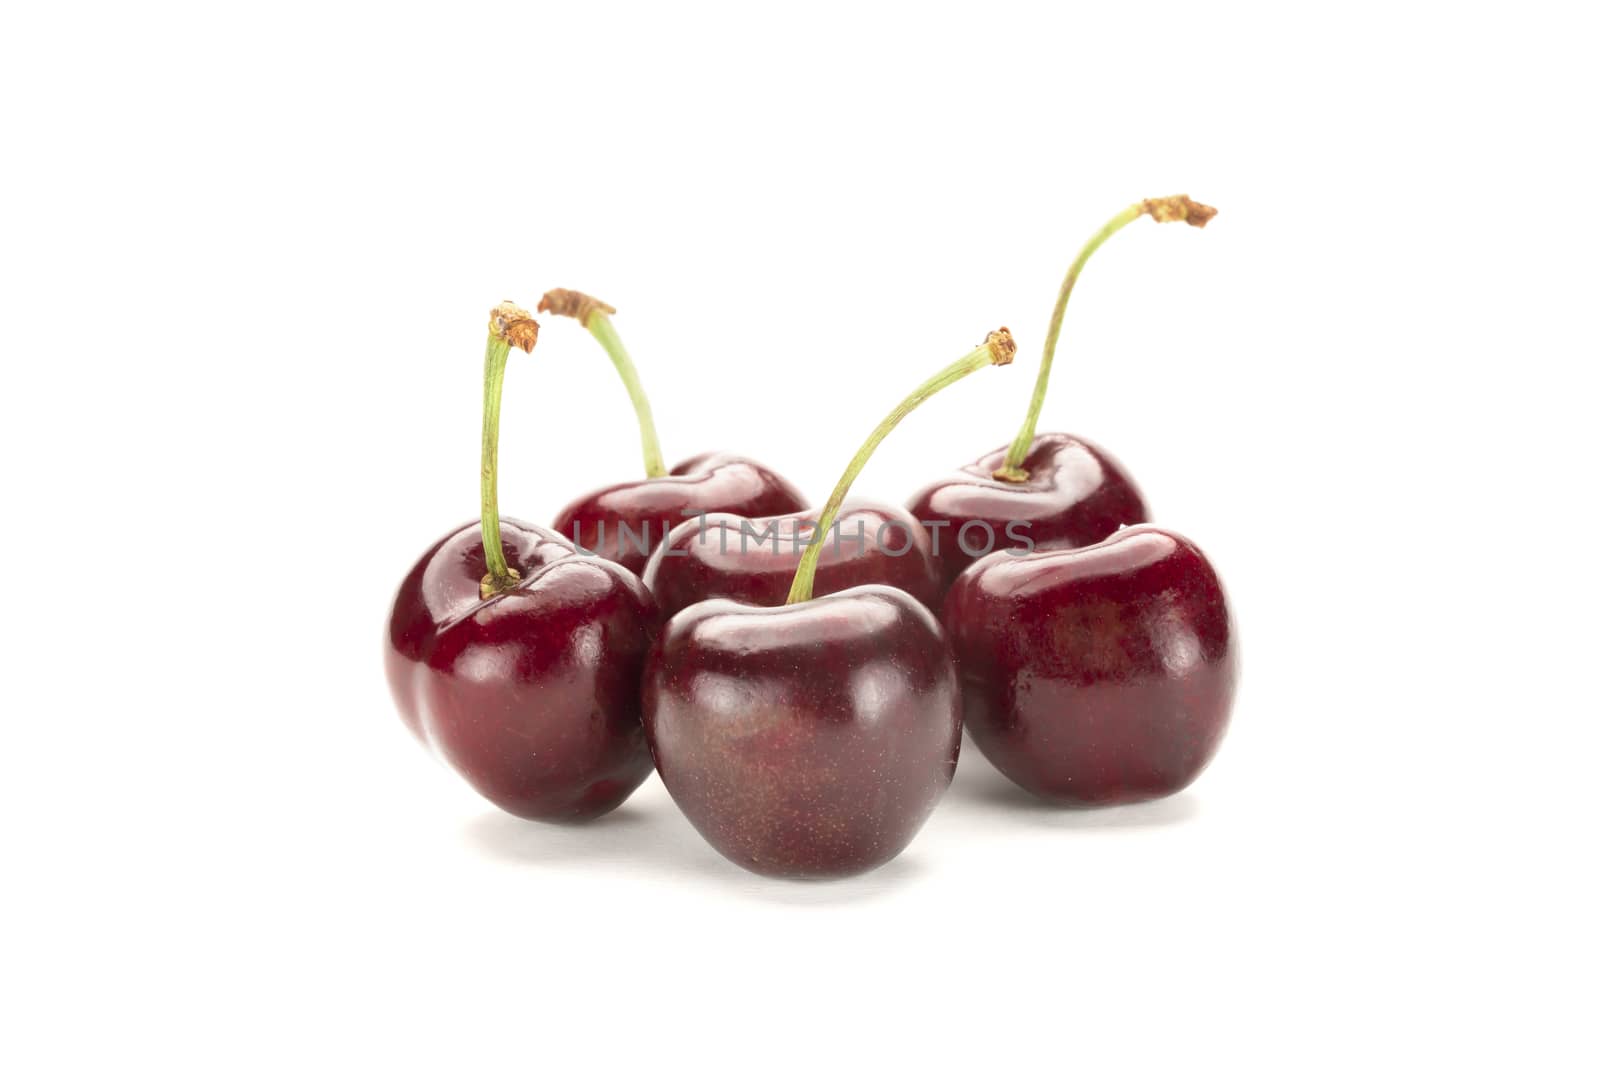 A bunch of ripe red cherries. Isolated on white background.